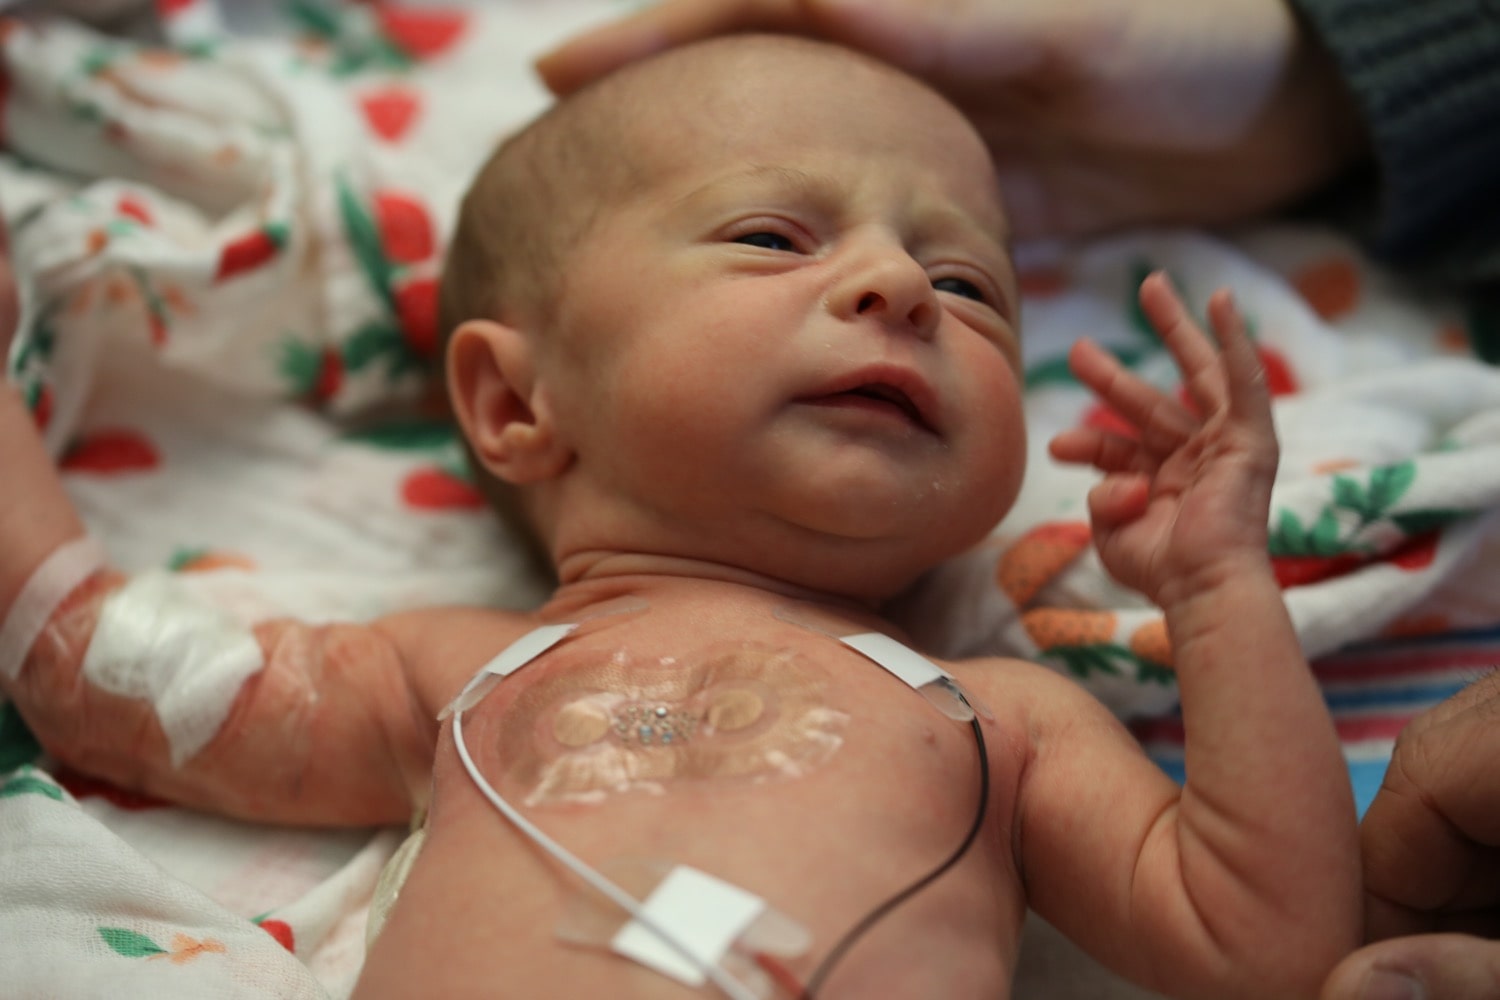 a newborn infant wears three small sensors taped to its torso along with a clear, oval shaped senser attached to the center of its chest